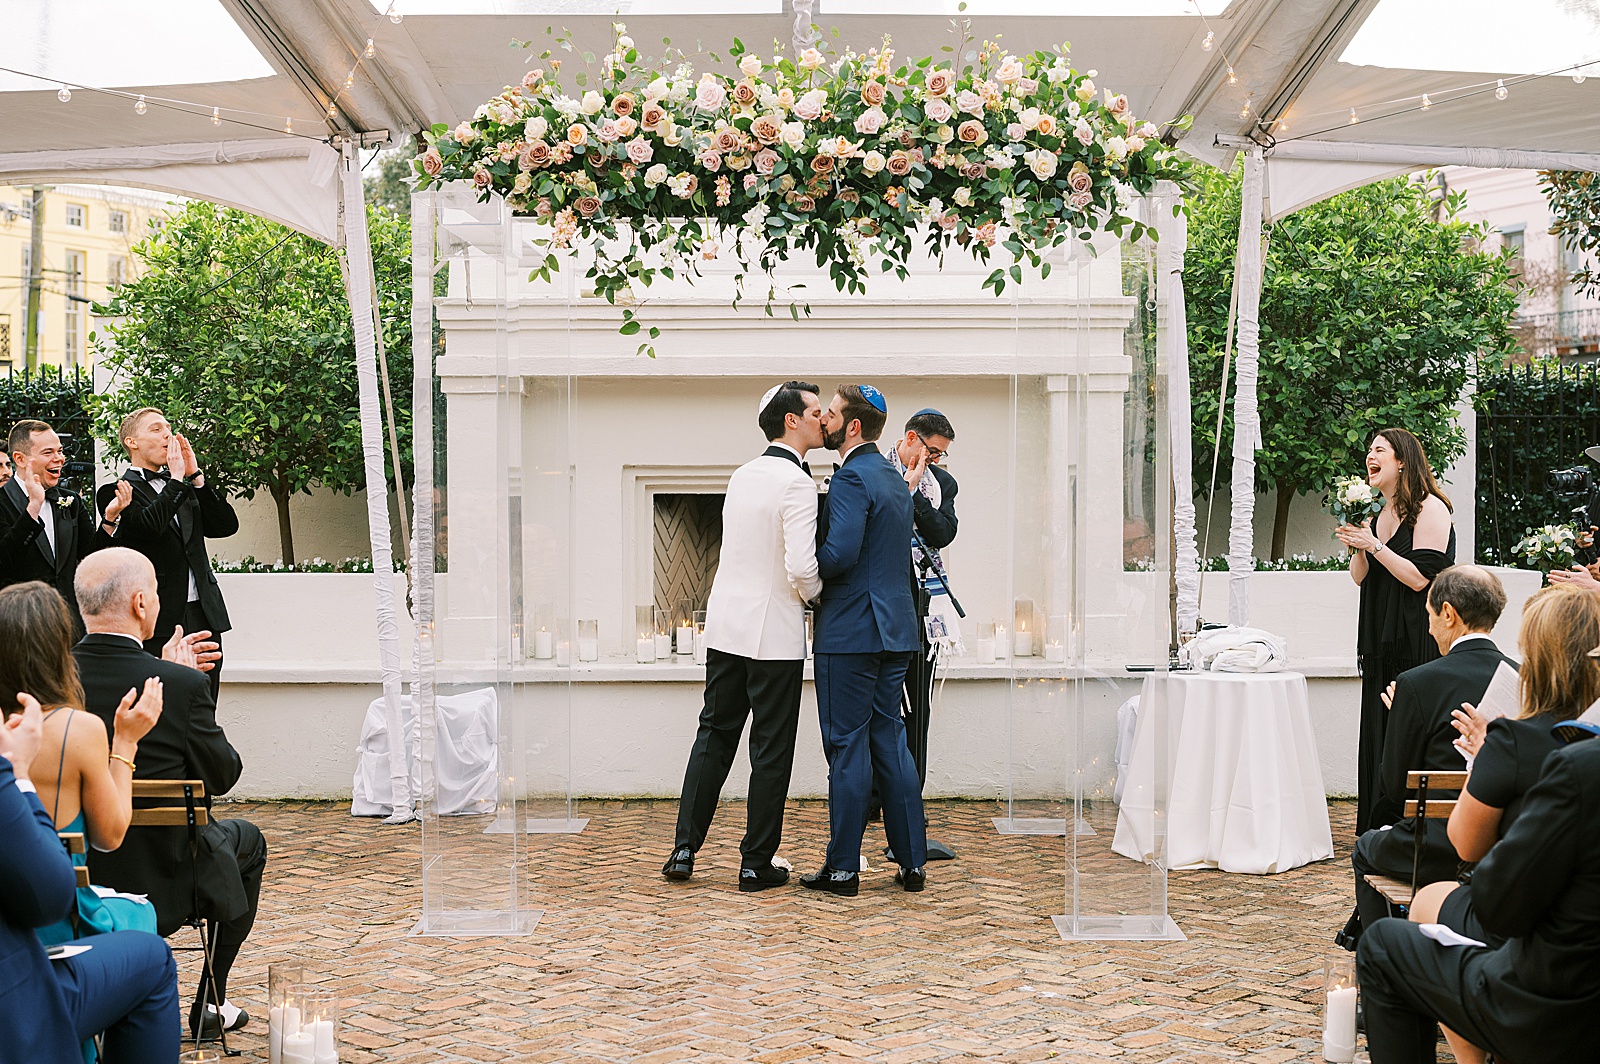 Two grooms kiss at the end of a Jewish wedding ceremony in a courtyard.